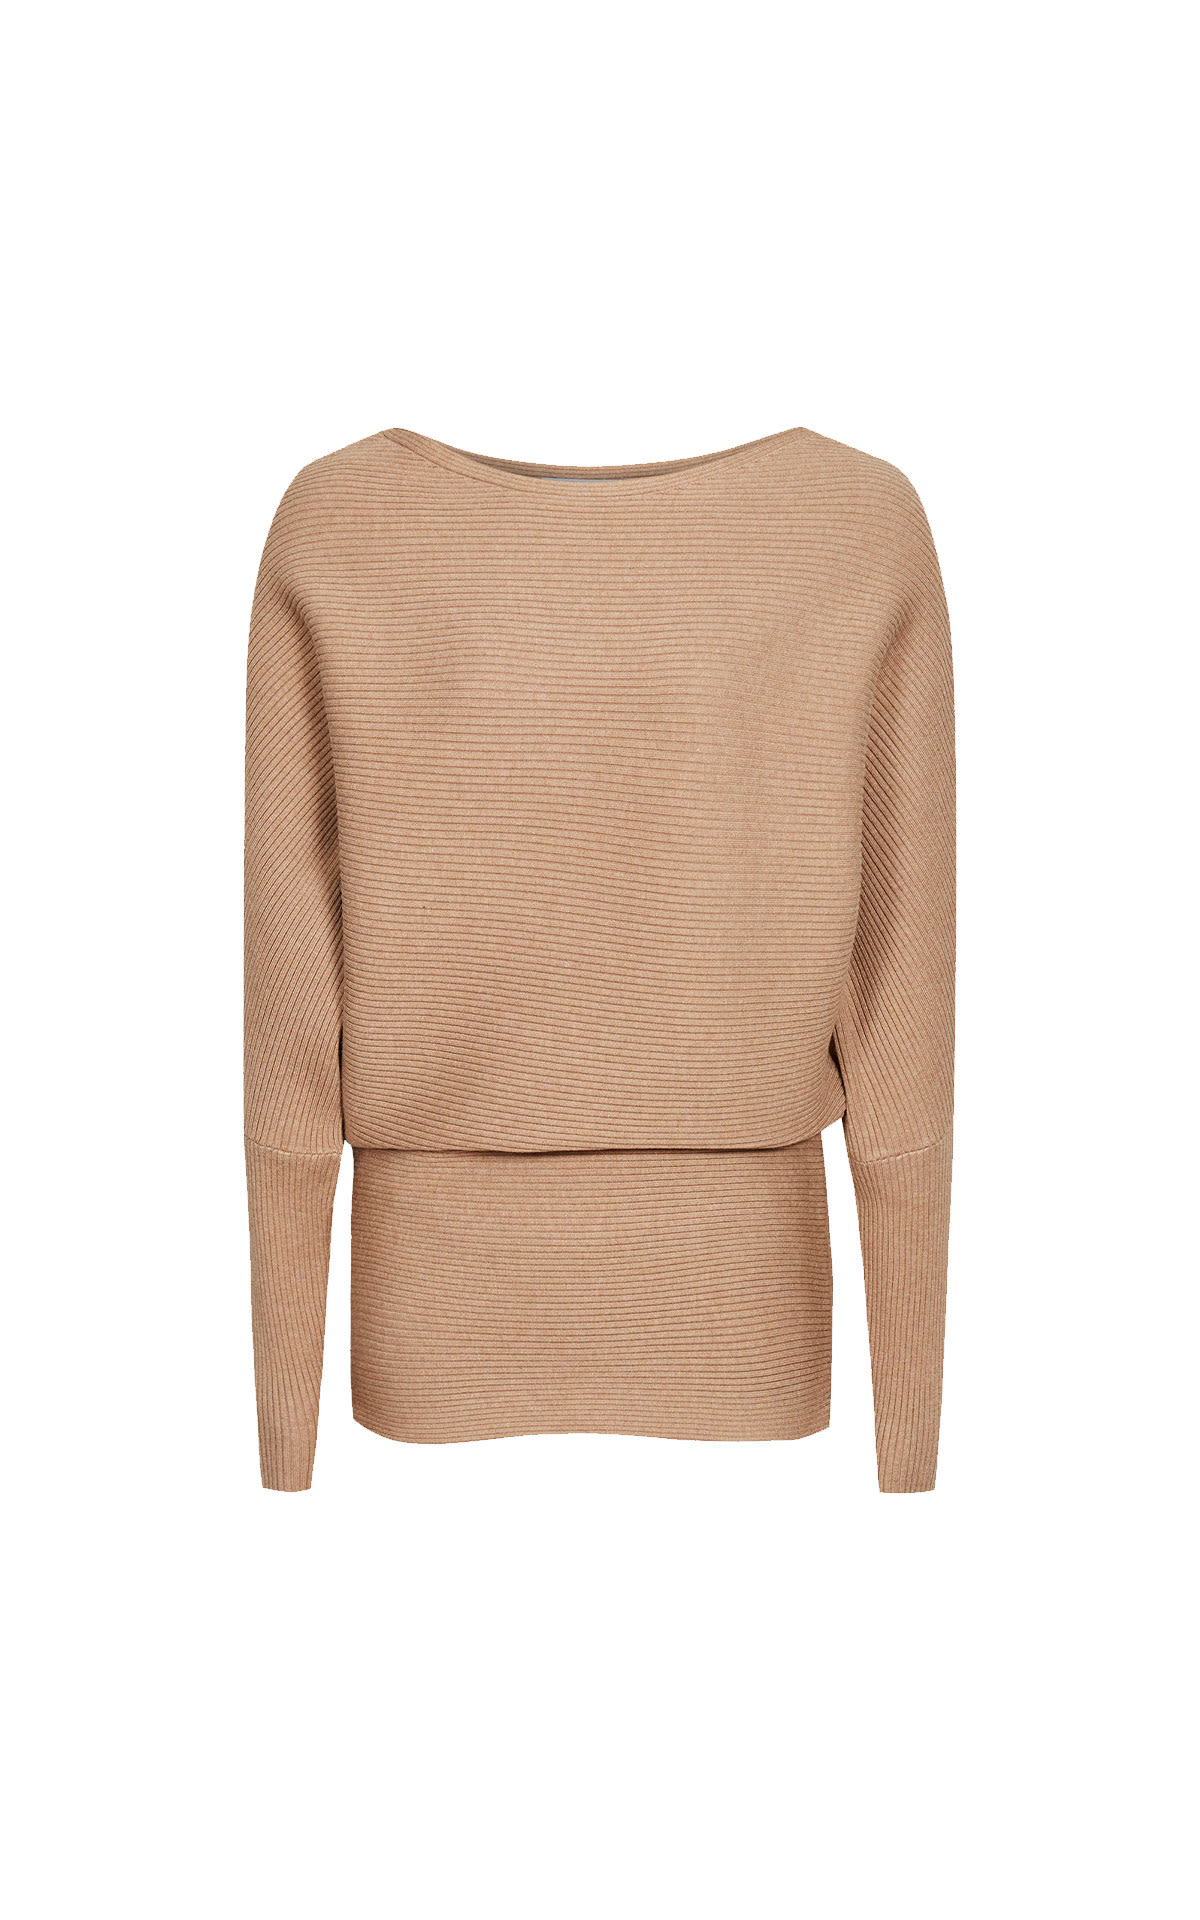 Reiss Lorena camel top from Bicester Village